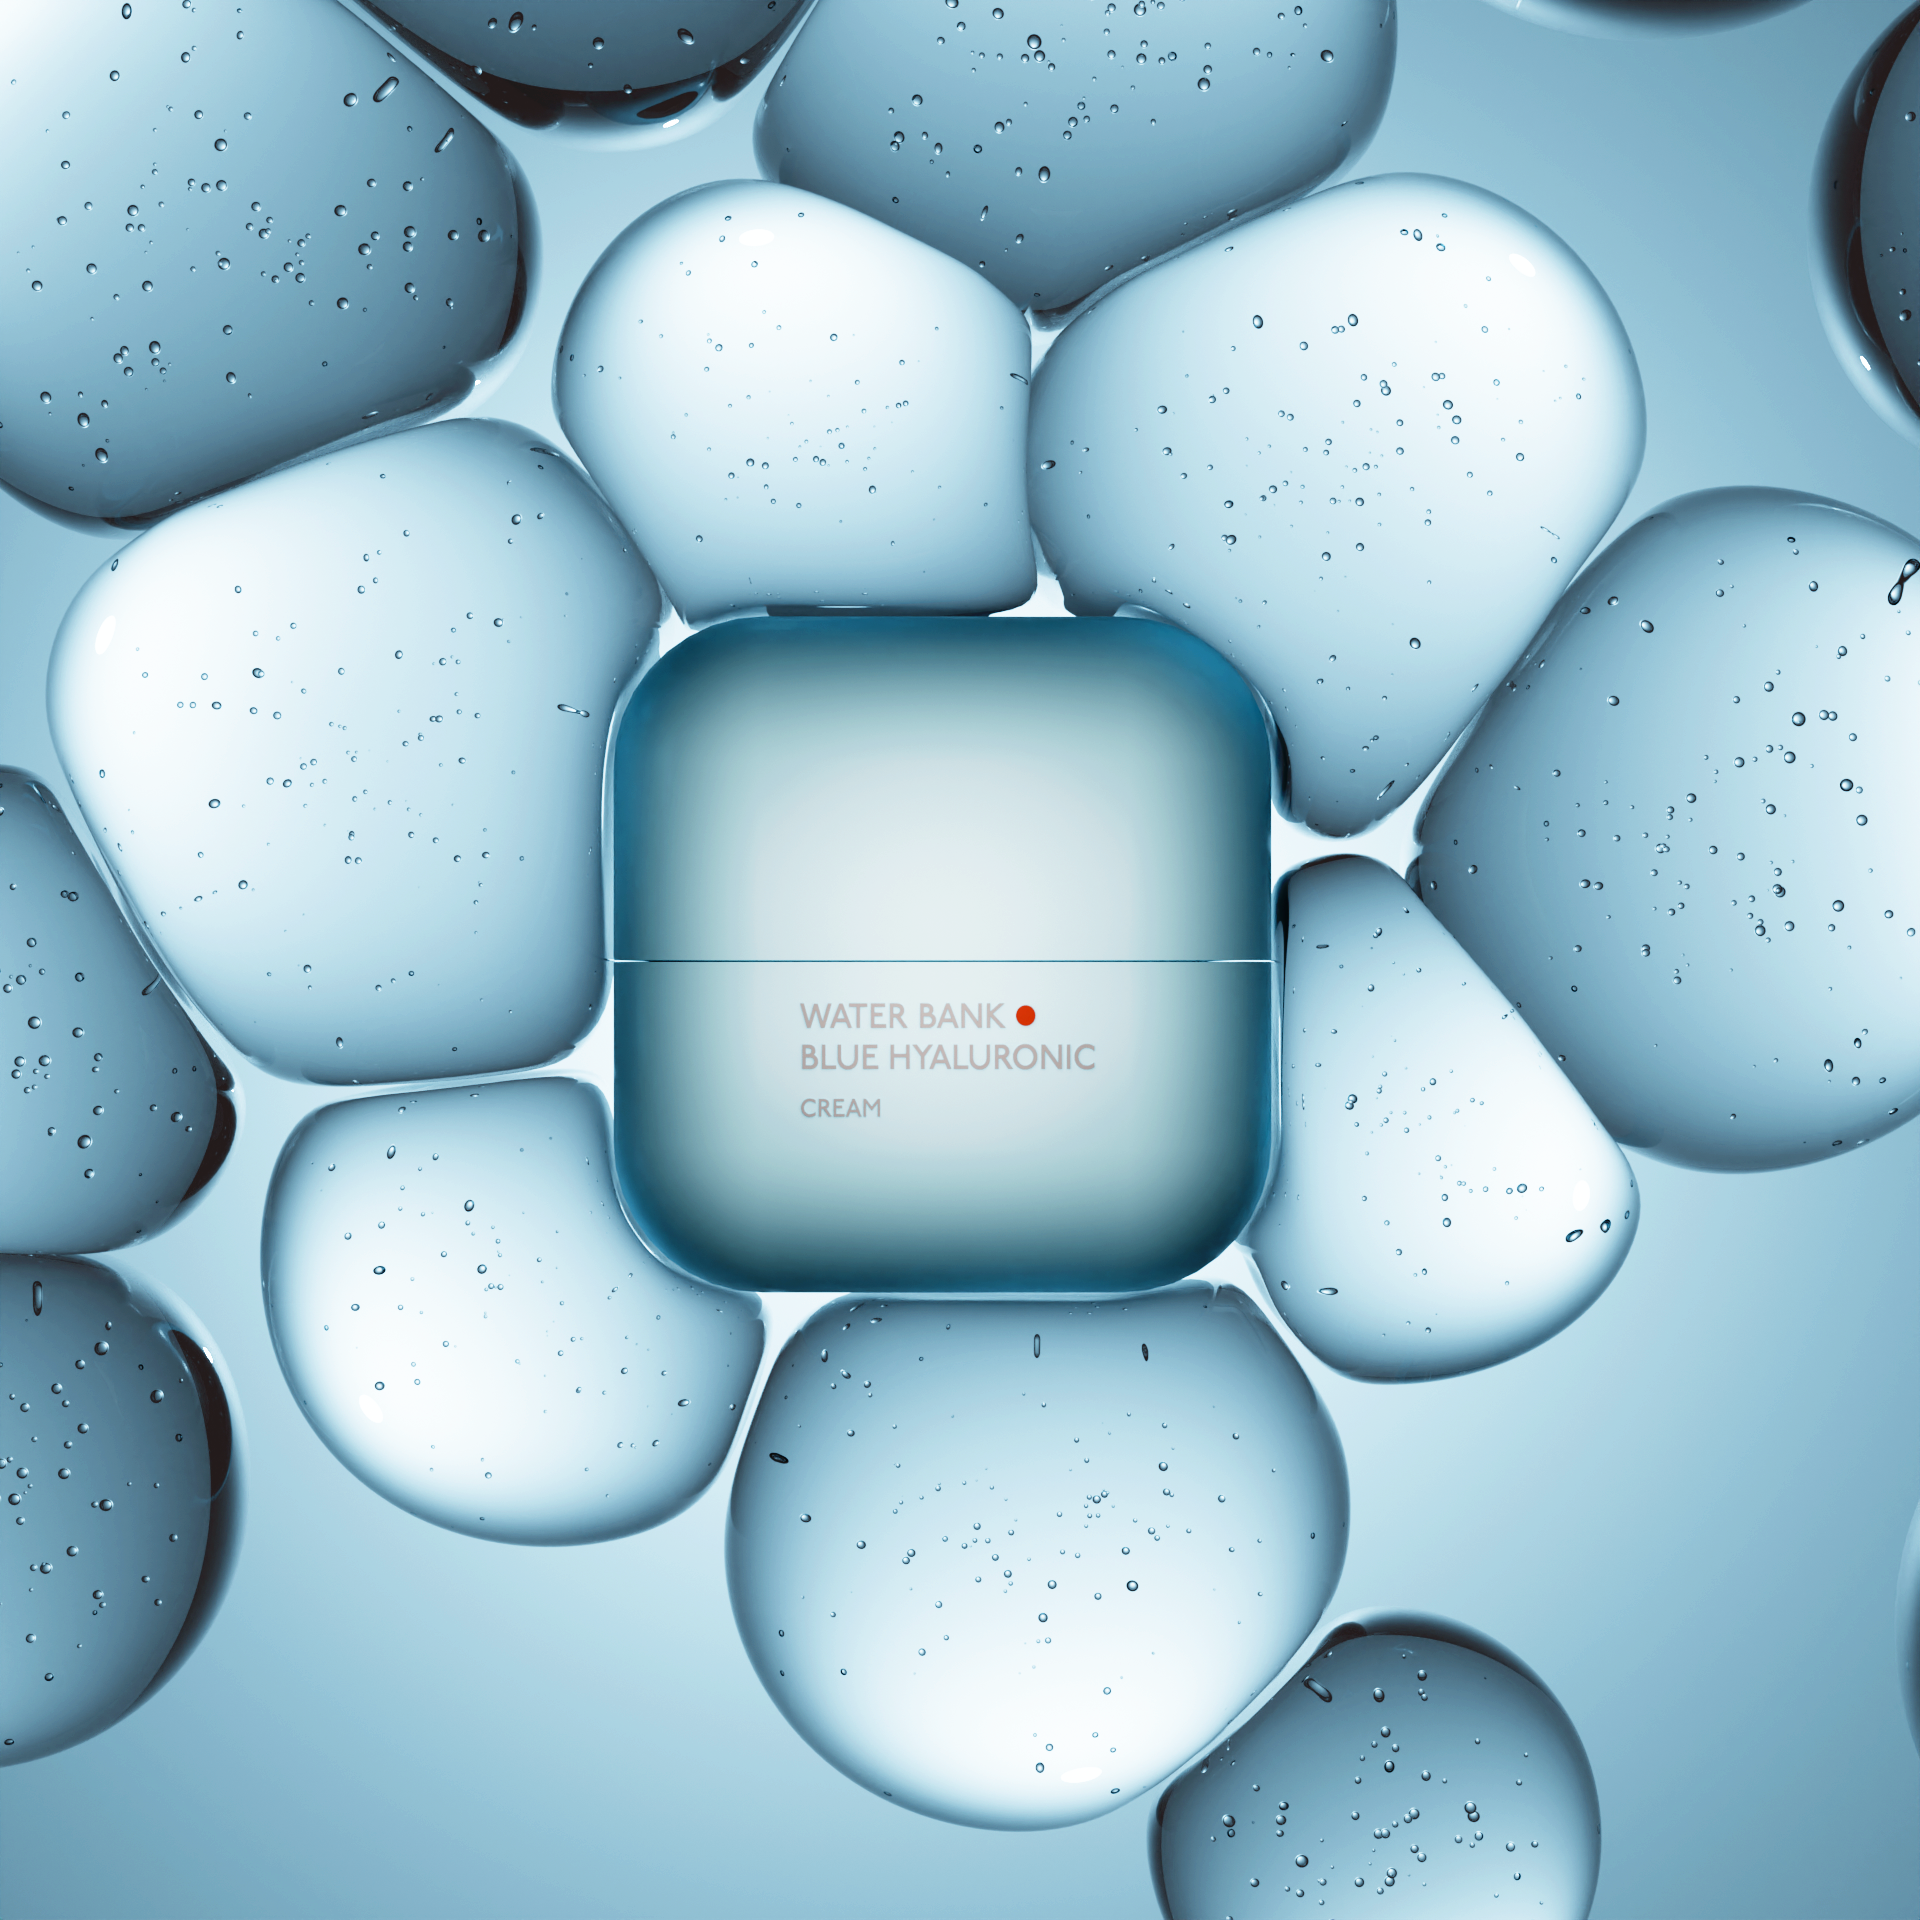 CGI 3D image of Laneige cream surrounded by large water drops